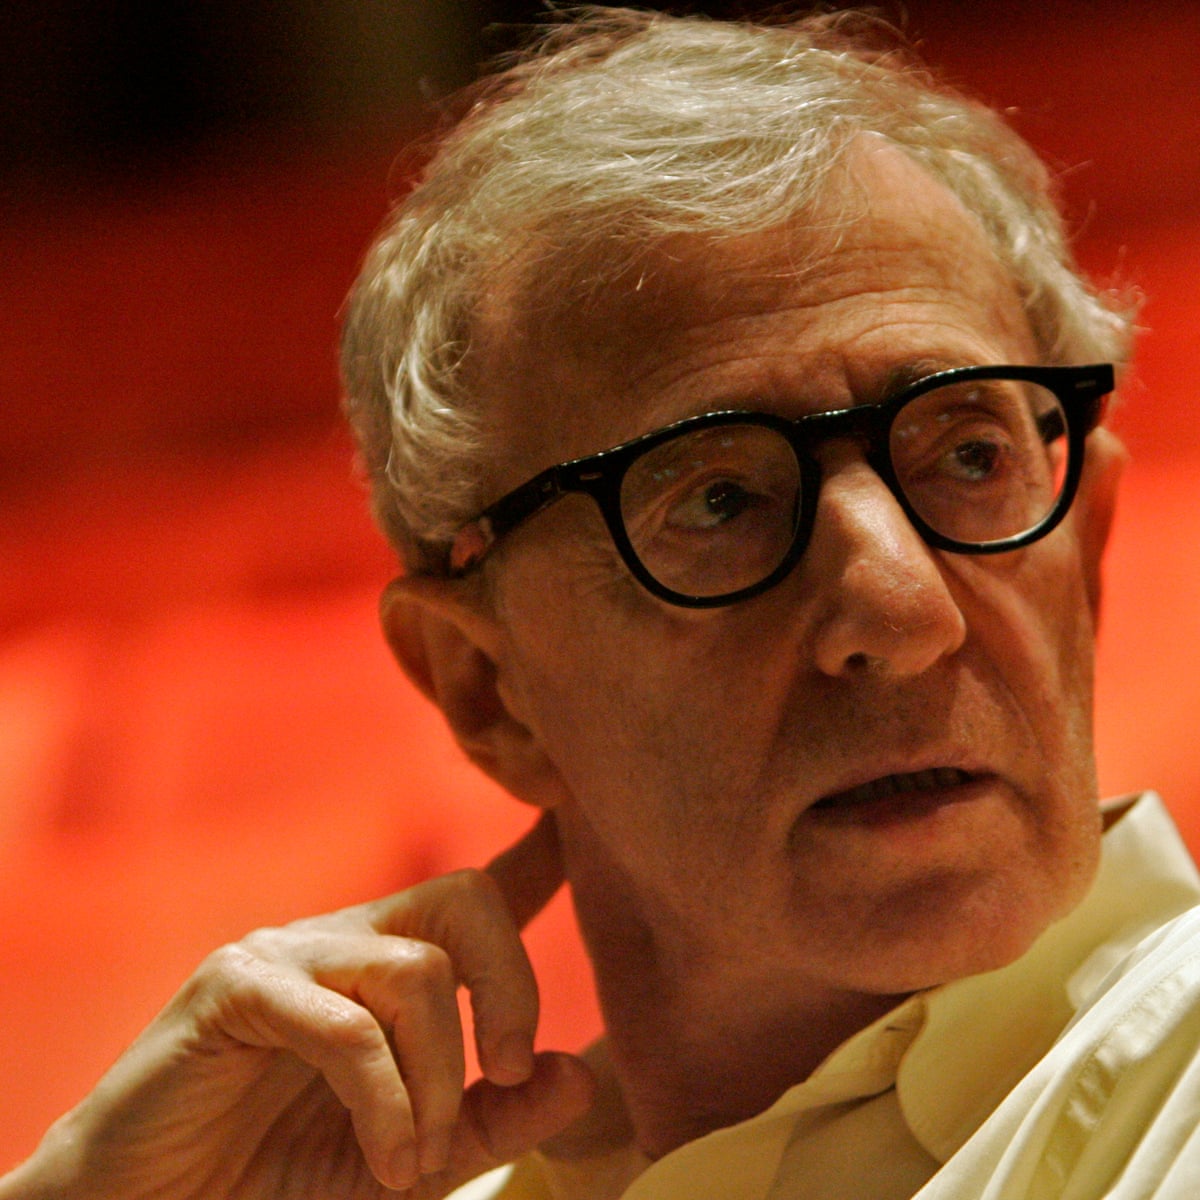 are lining up condemn Woody Allen. Why now? | Life and style | The Guardian